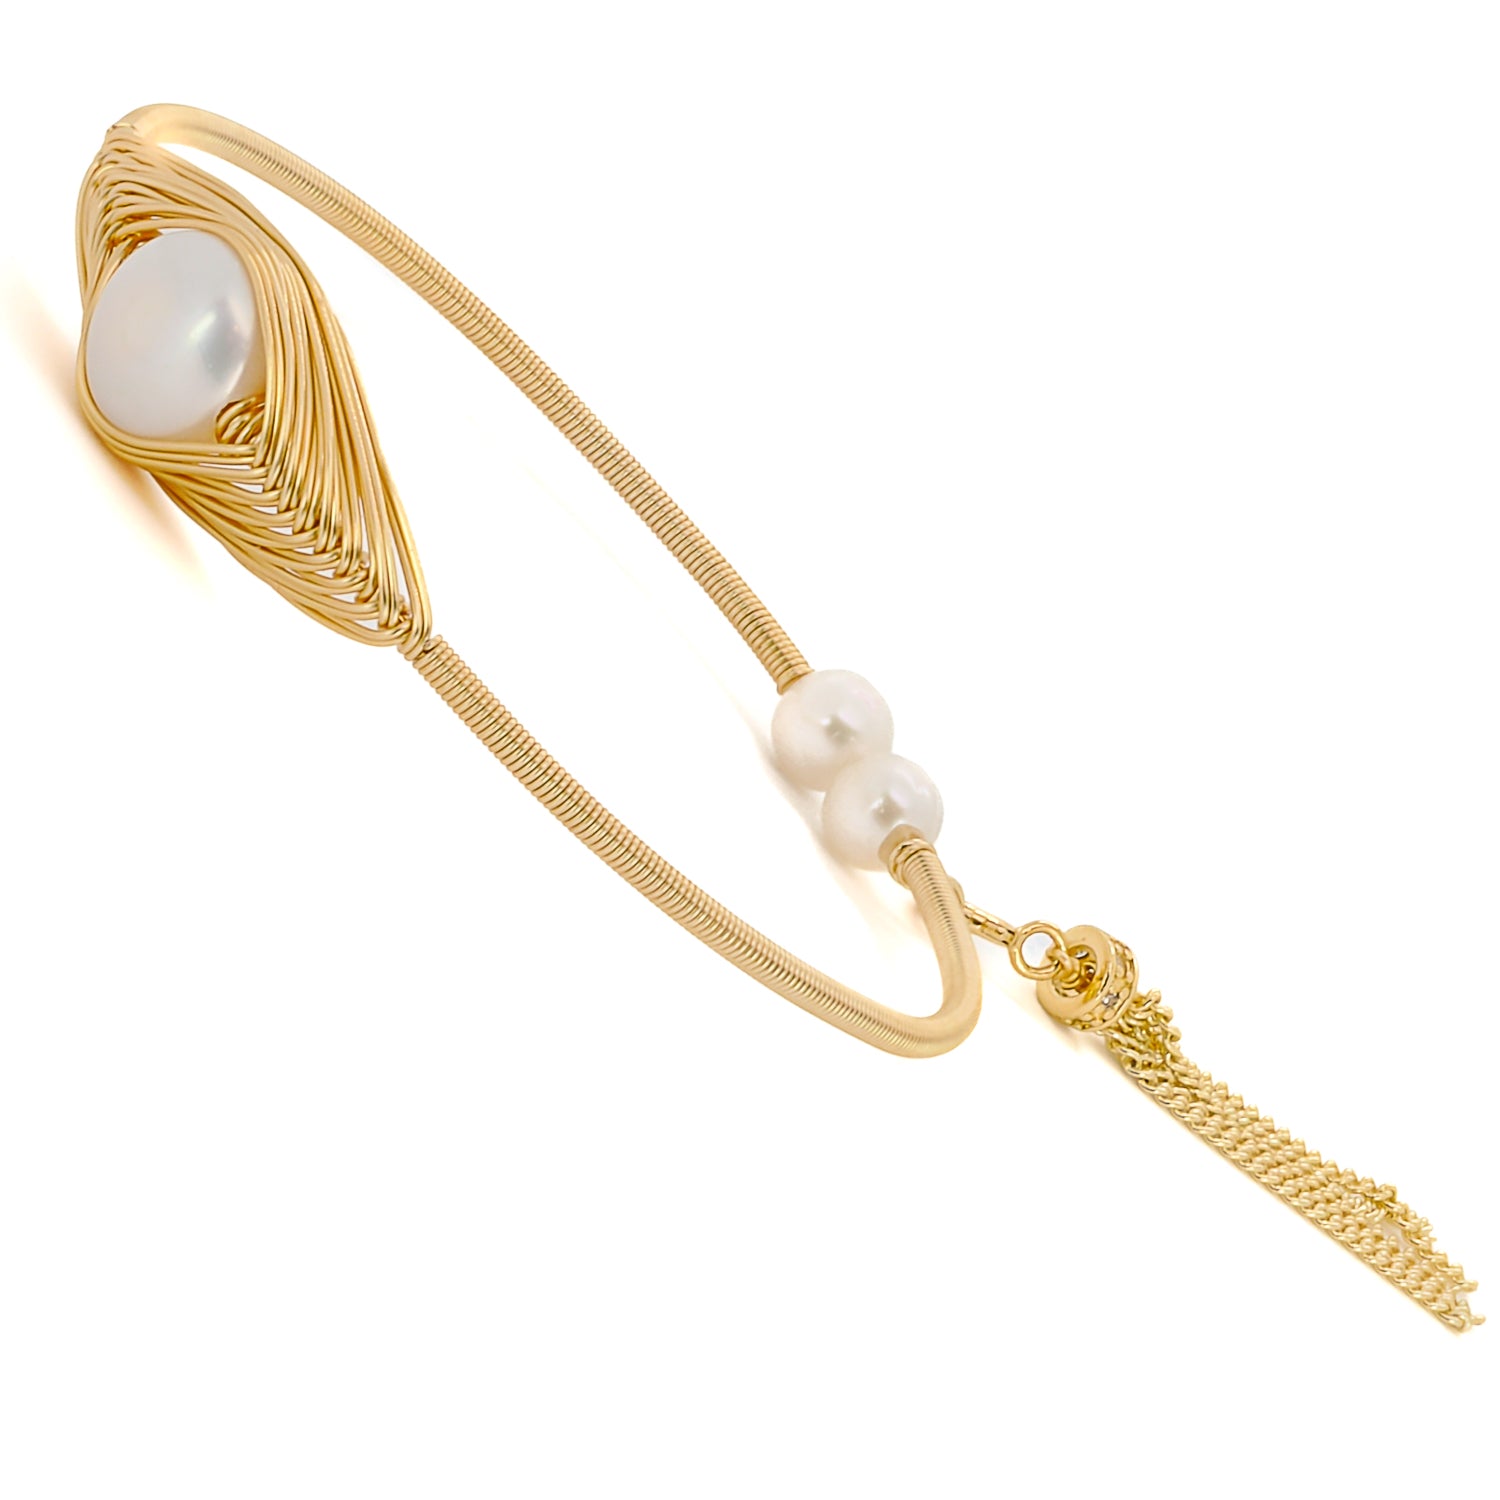 Modern charm with a touch of classic elegance: Cleopatra Pearl Bangle Bracelet.